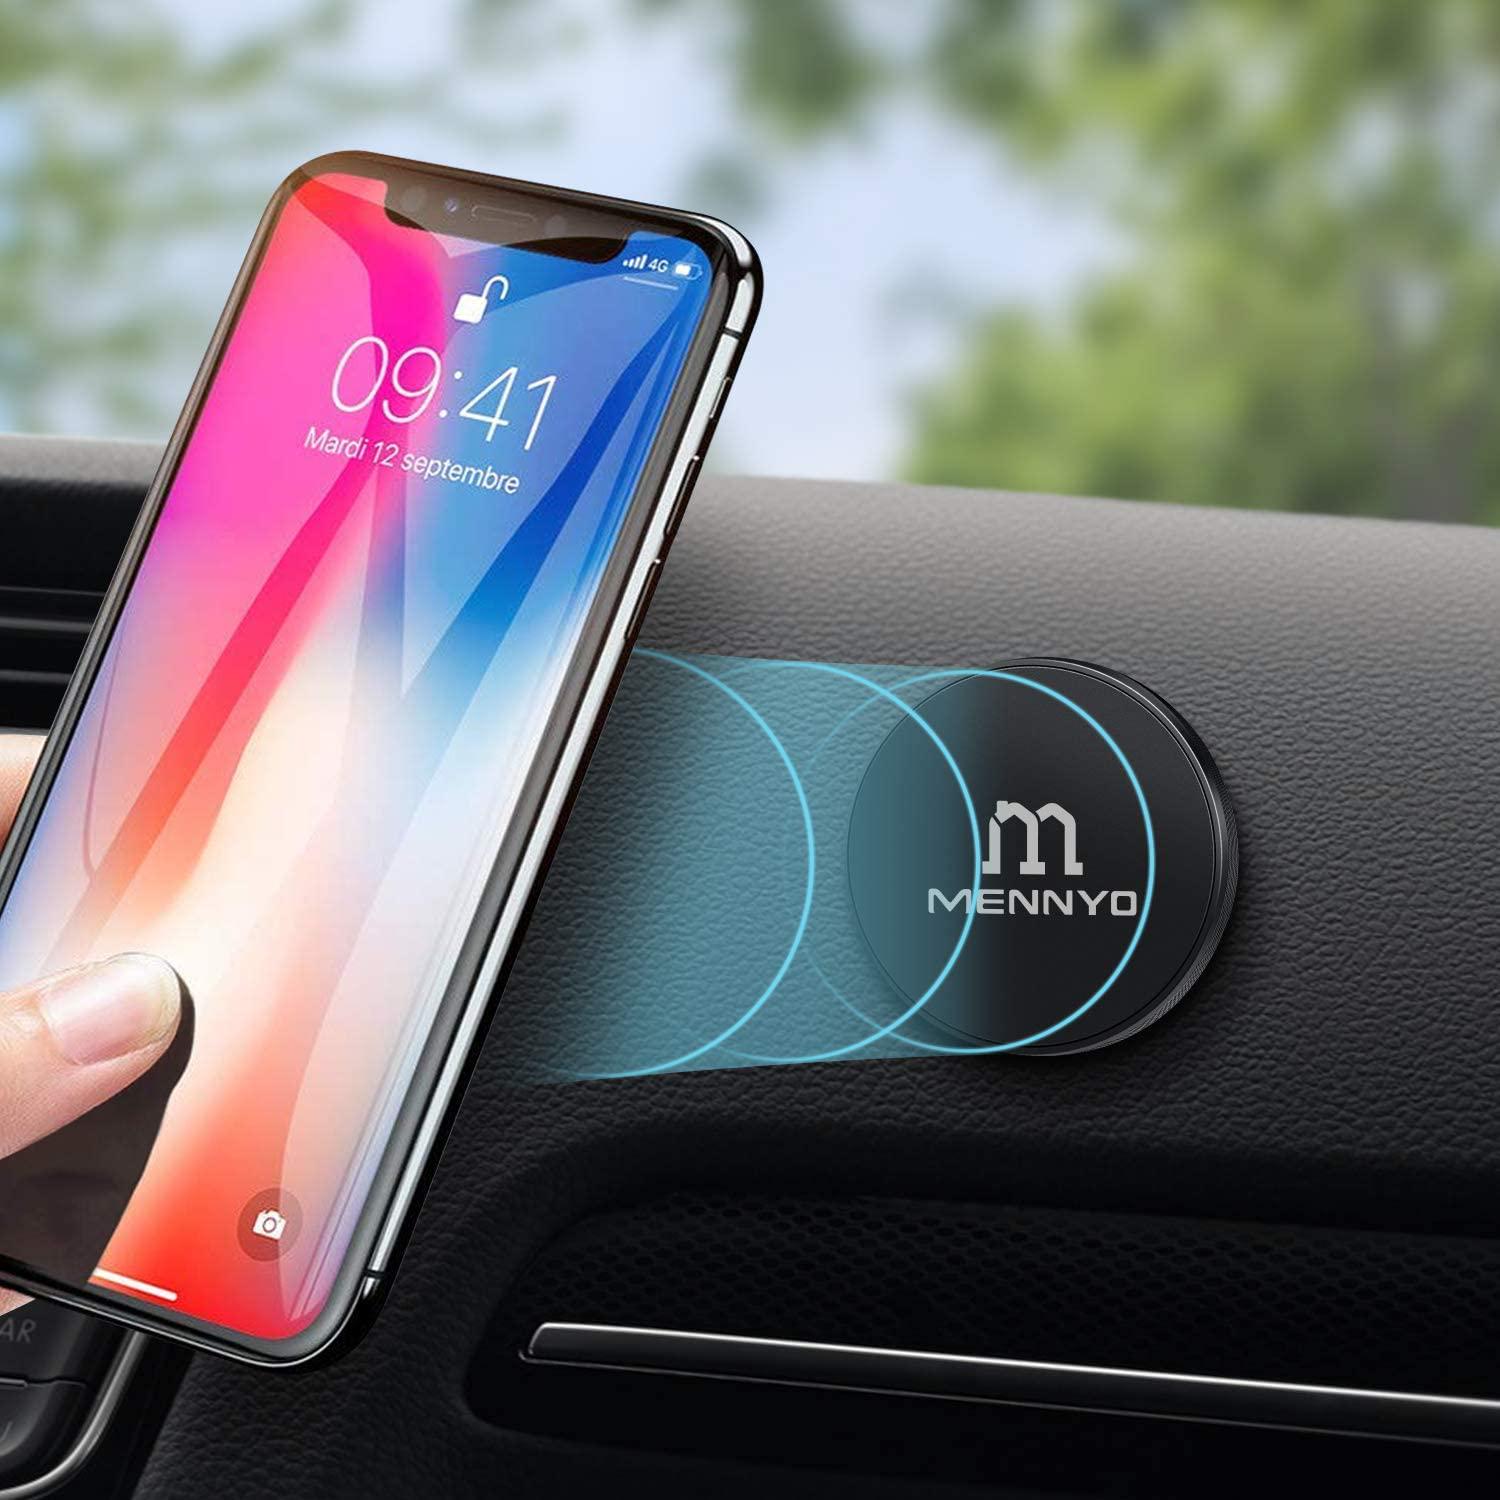 MENNYO, MENNYO Magnetic Phone Holder, 3 Pack Car Magnet Mount with Metal Plate Stick on Dashboard | Wall Magnet Sticker for iPhone 11/X/Xs/Xs Max/8 Samsung Galaxy S10/S9/S8/Note Huawei and Other Mobile Phones